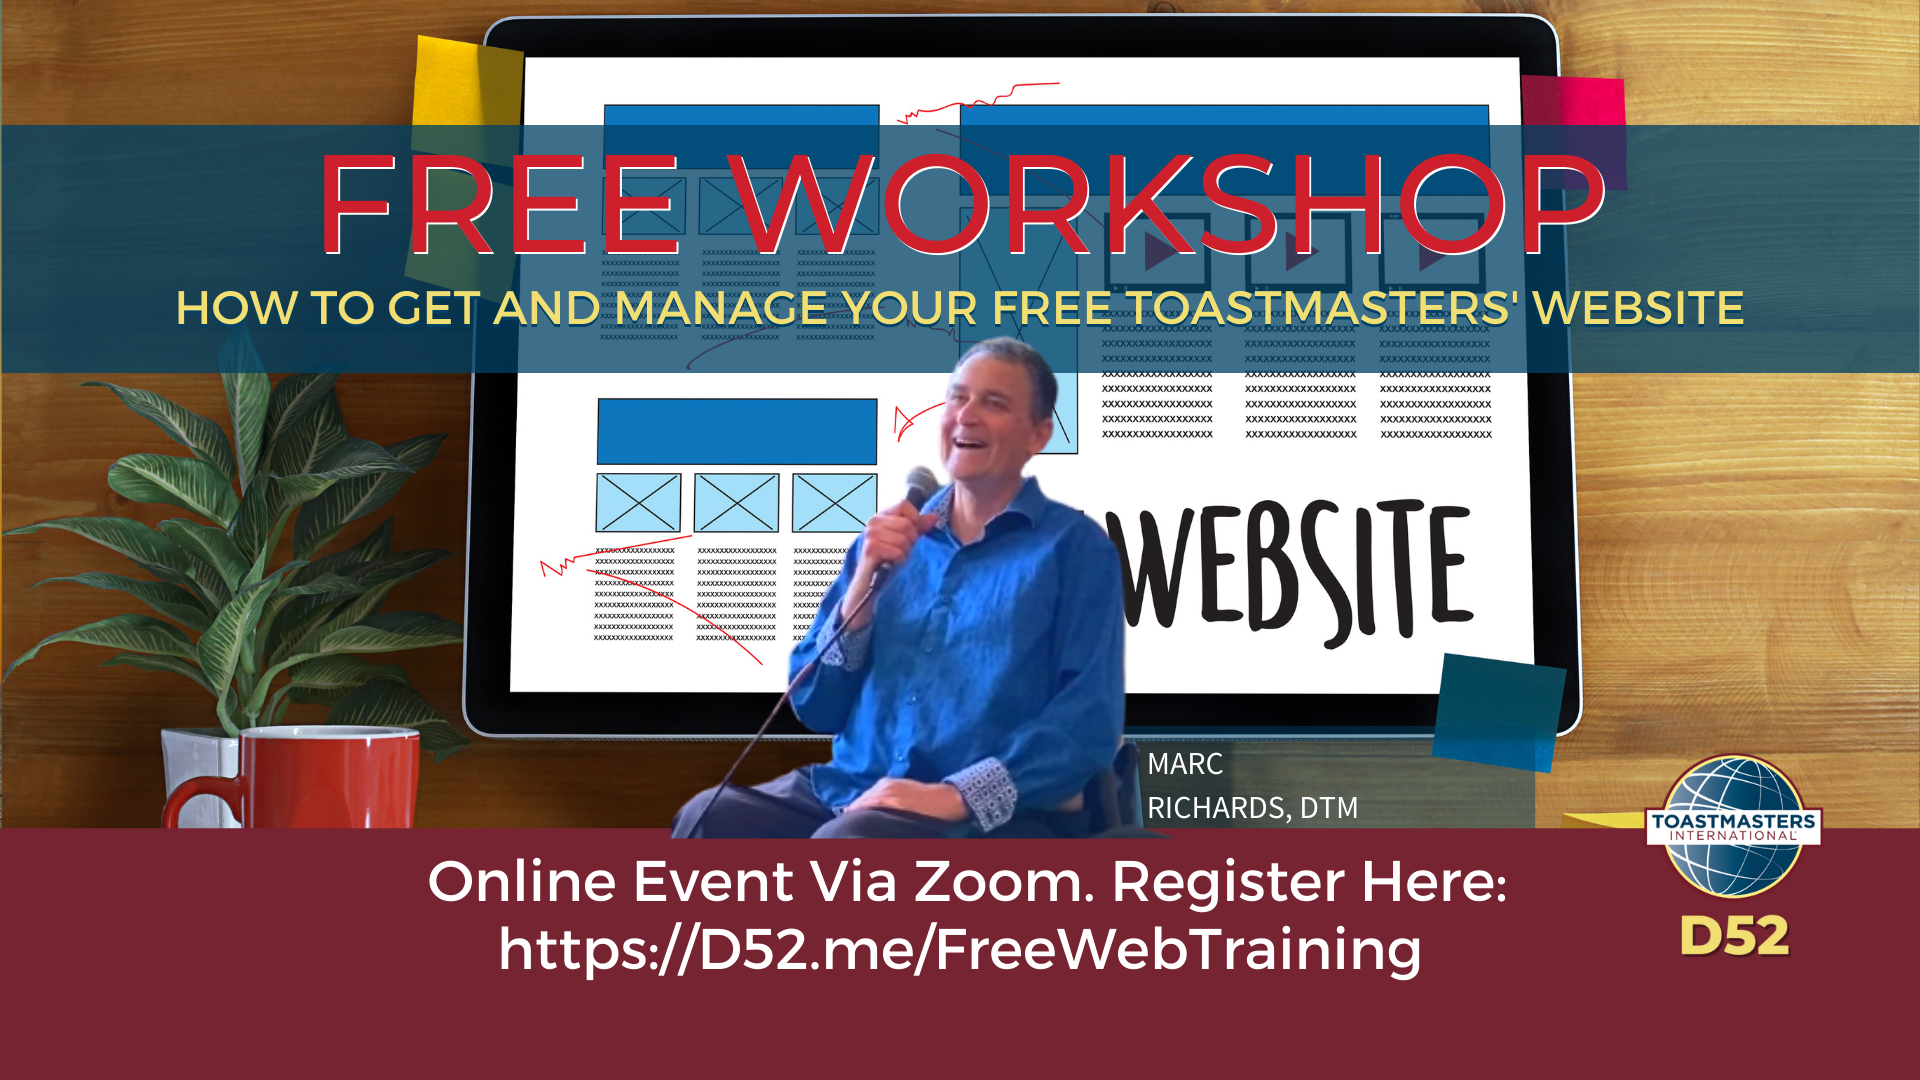 Flyer for the WORKSHOP Free Toastmasters Website